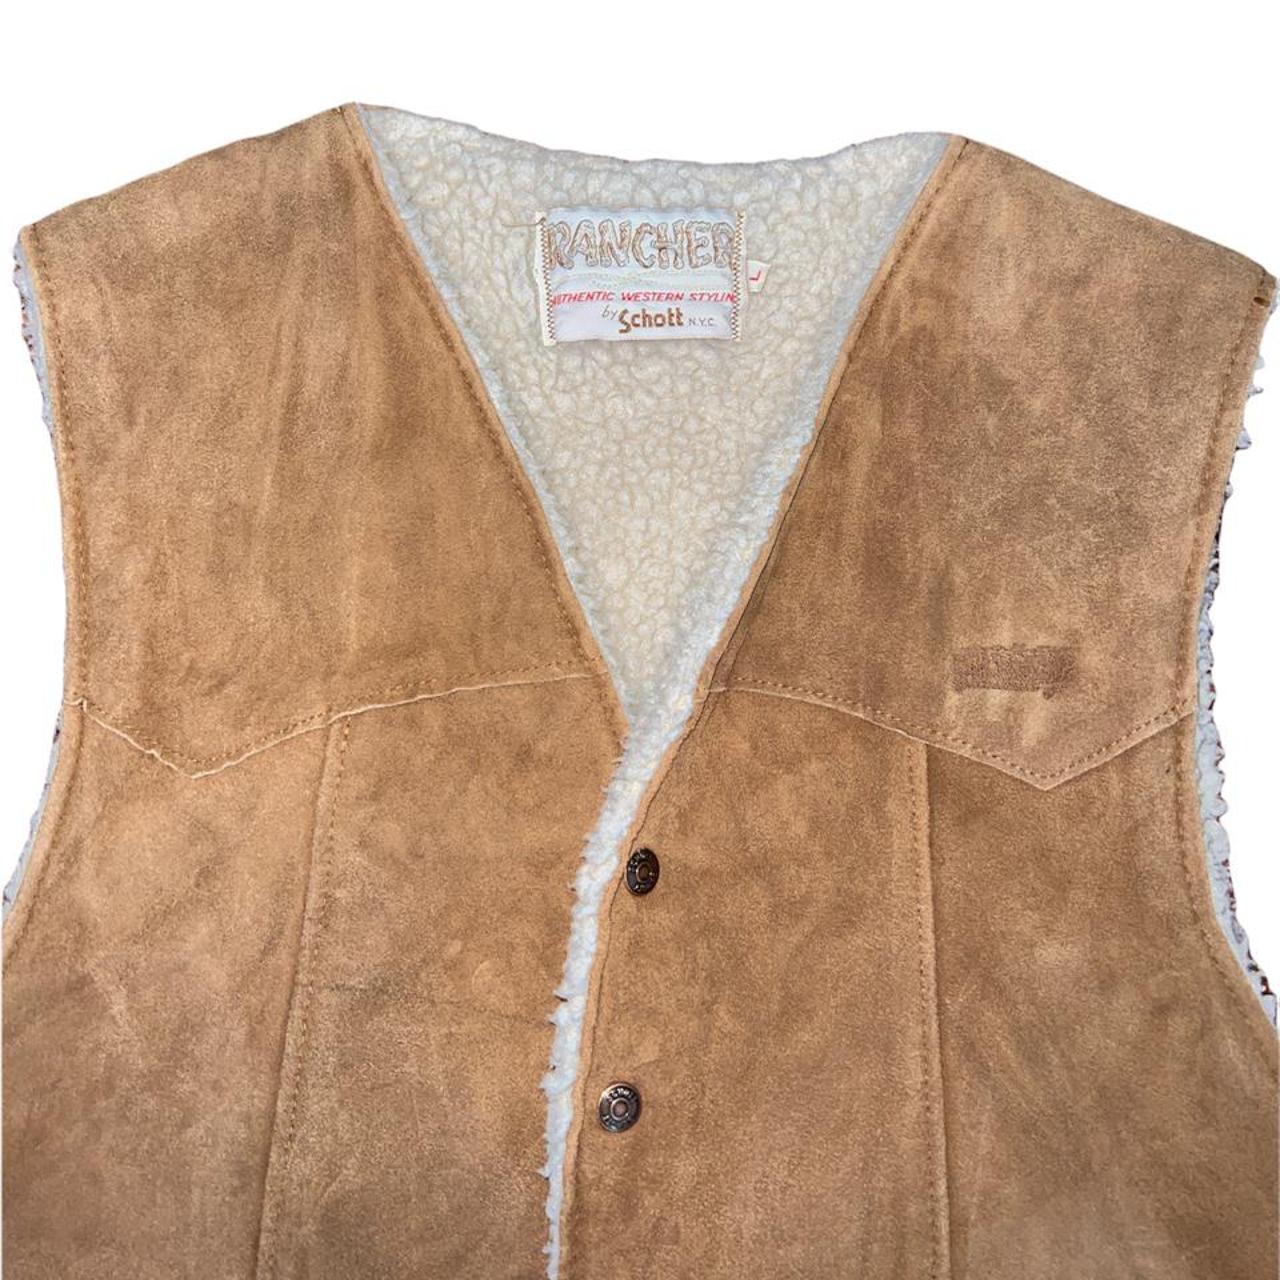 Product Image 2 - VINTAGE SUEDE VEST with sherpa